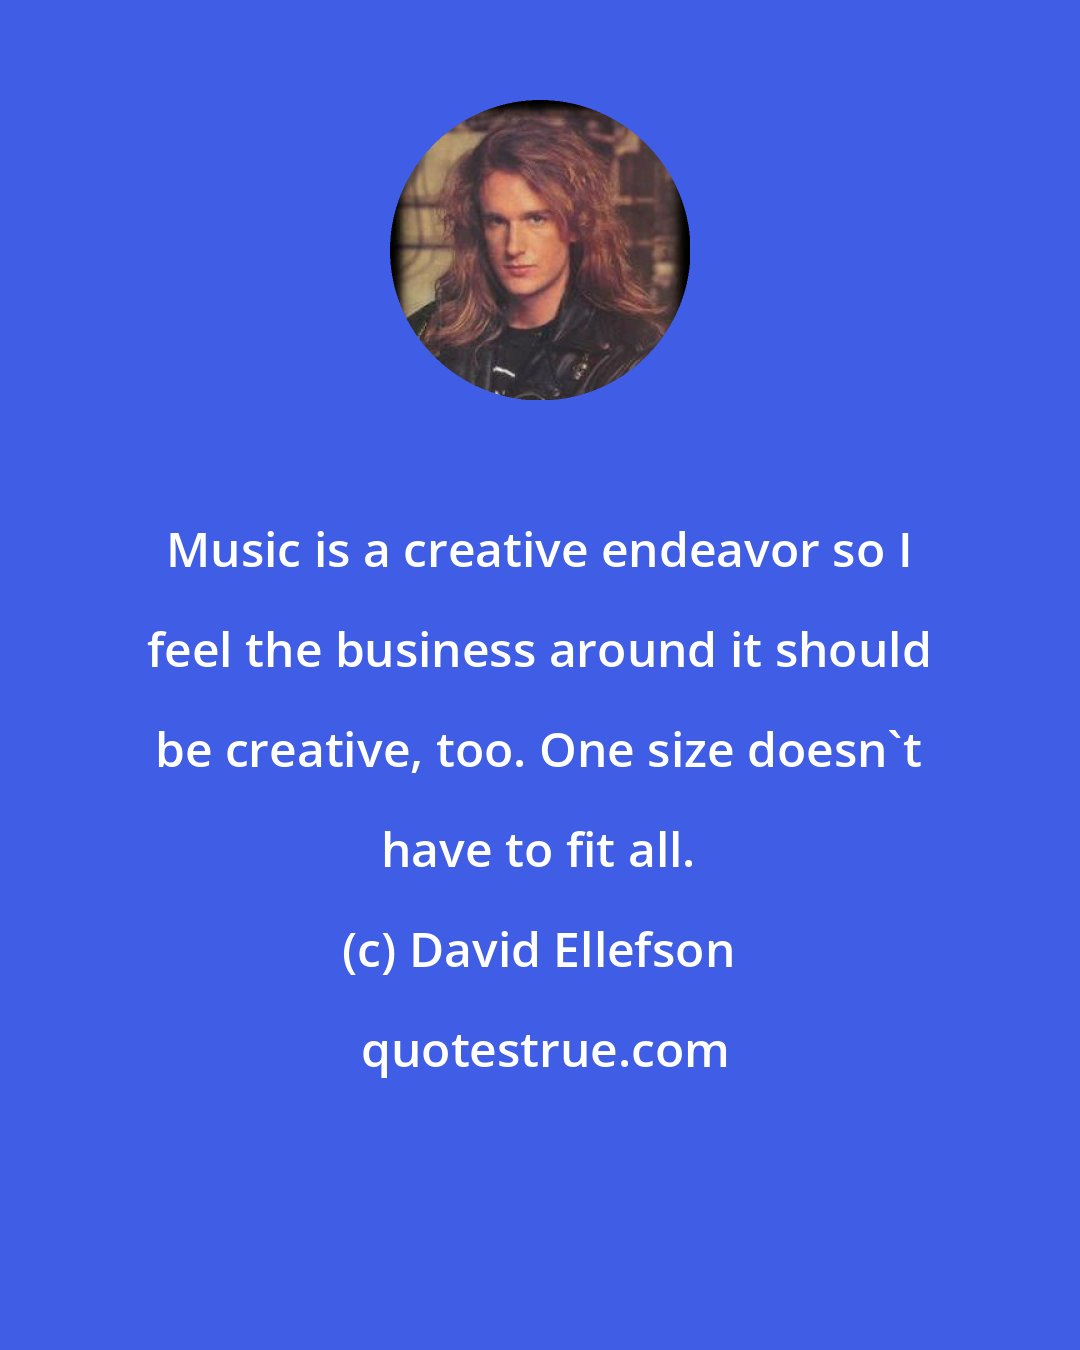 David Ellefson: Music is a creative endeavor so I feel the business around it should be creative, too. One size doesn't have to fit all.